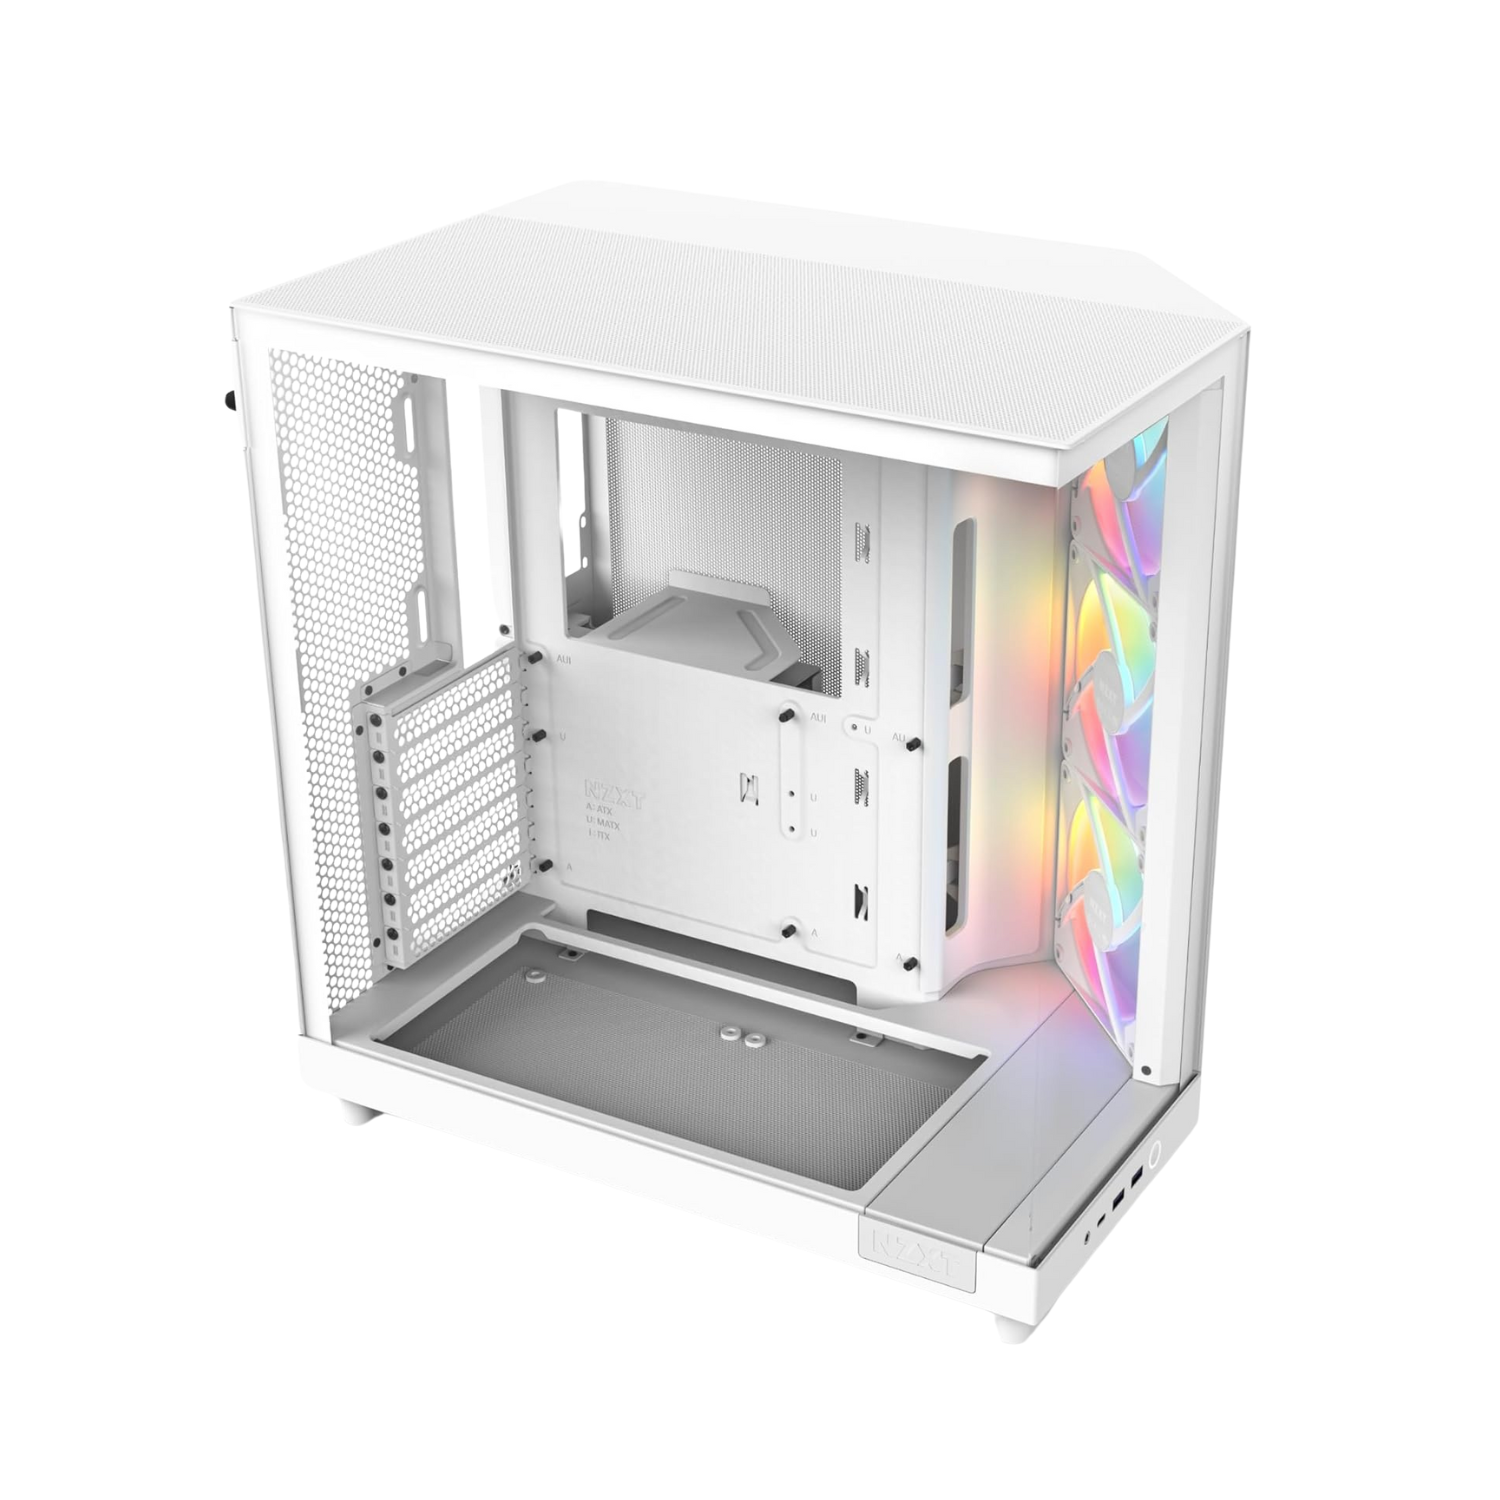 NZXT H6 Flow RGB Mid-Tower Airflow Case with 3 RGB Fans, Panoramic Glass Panels, and Cable Management - White